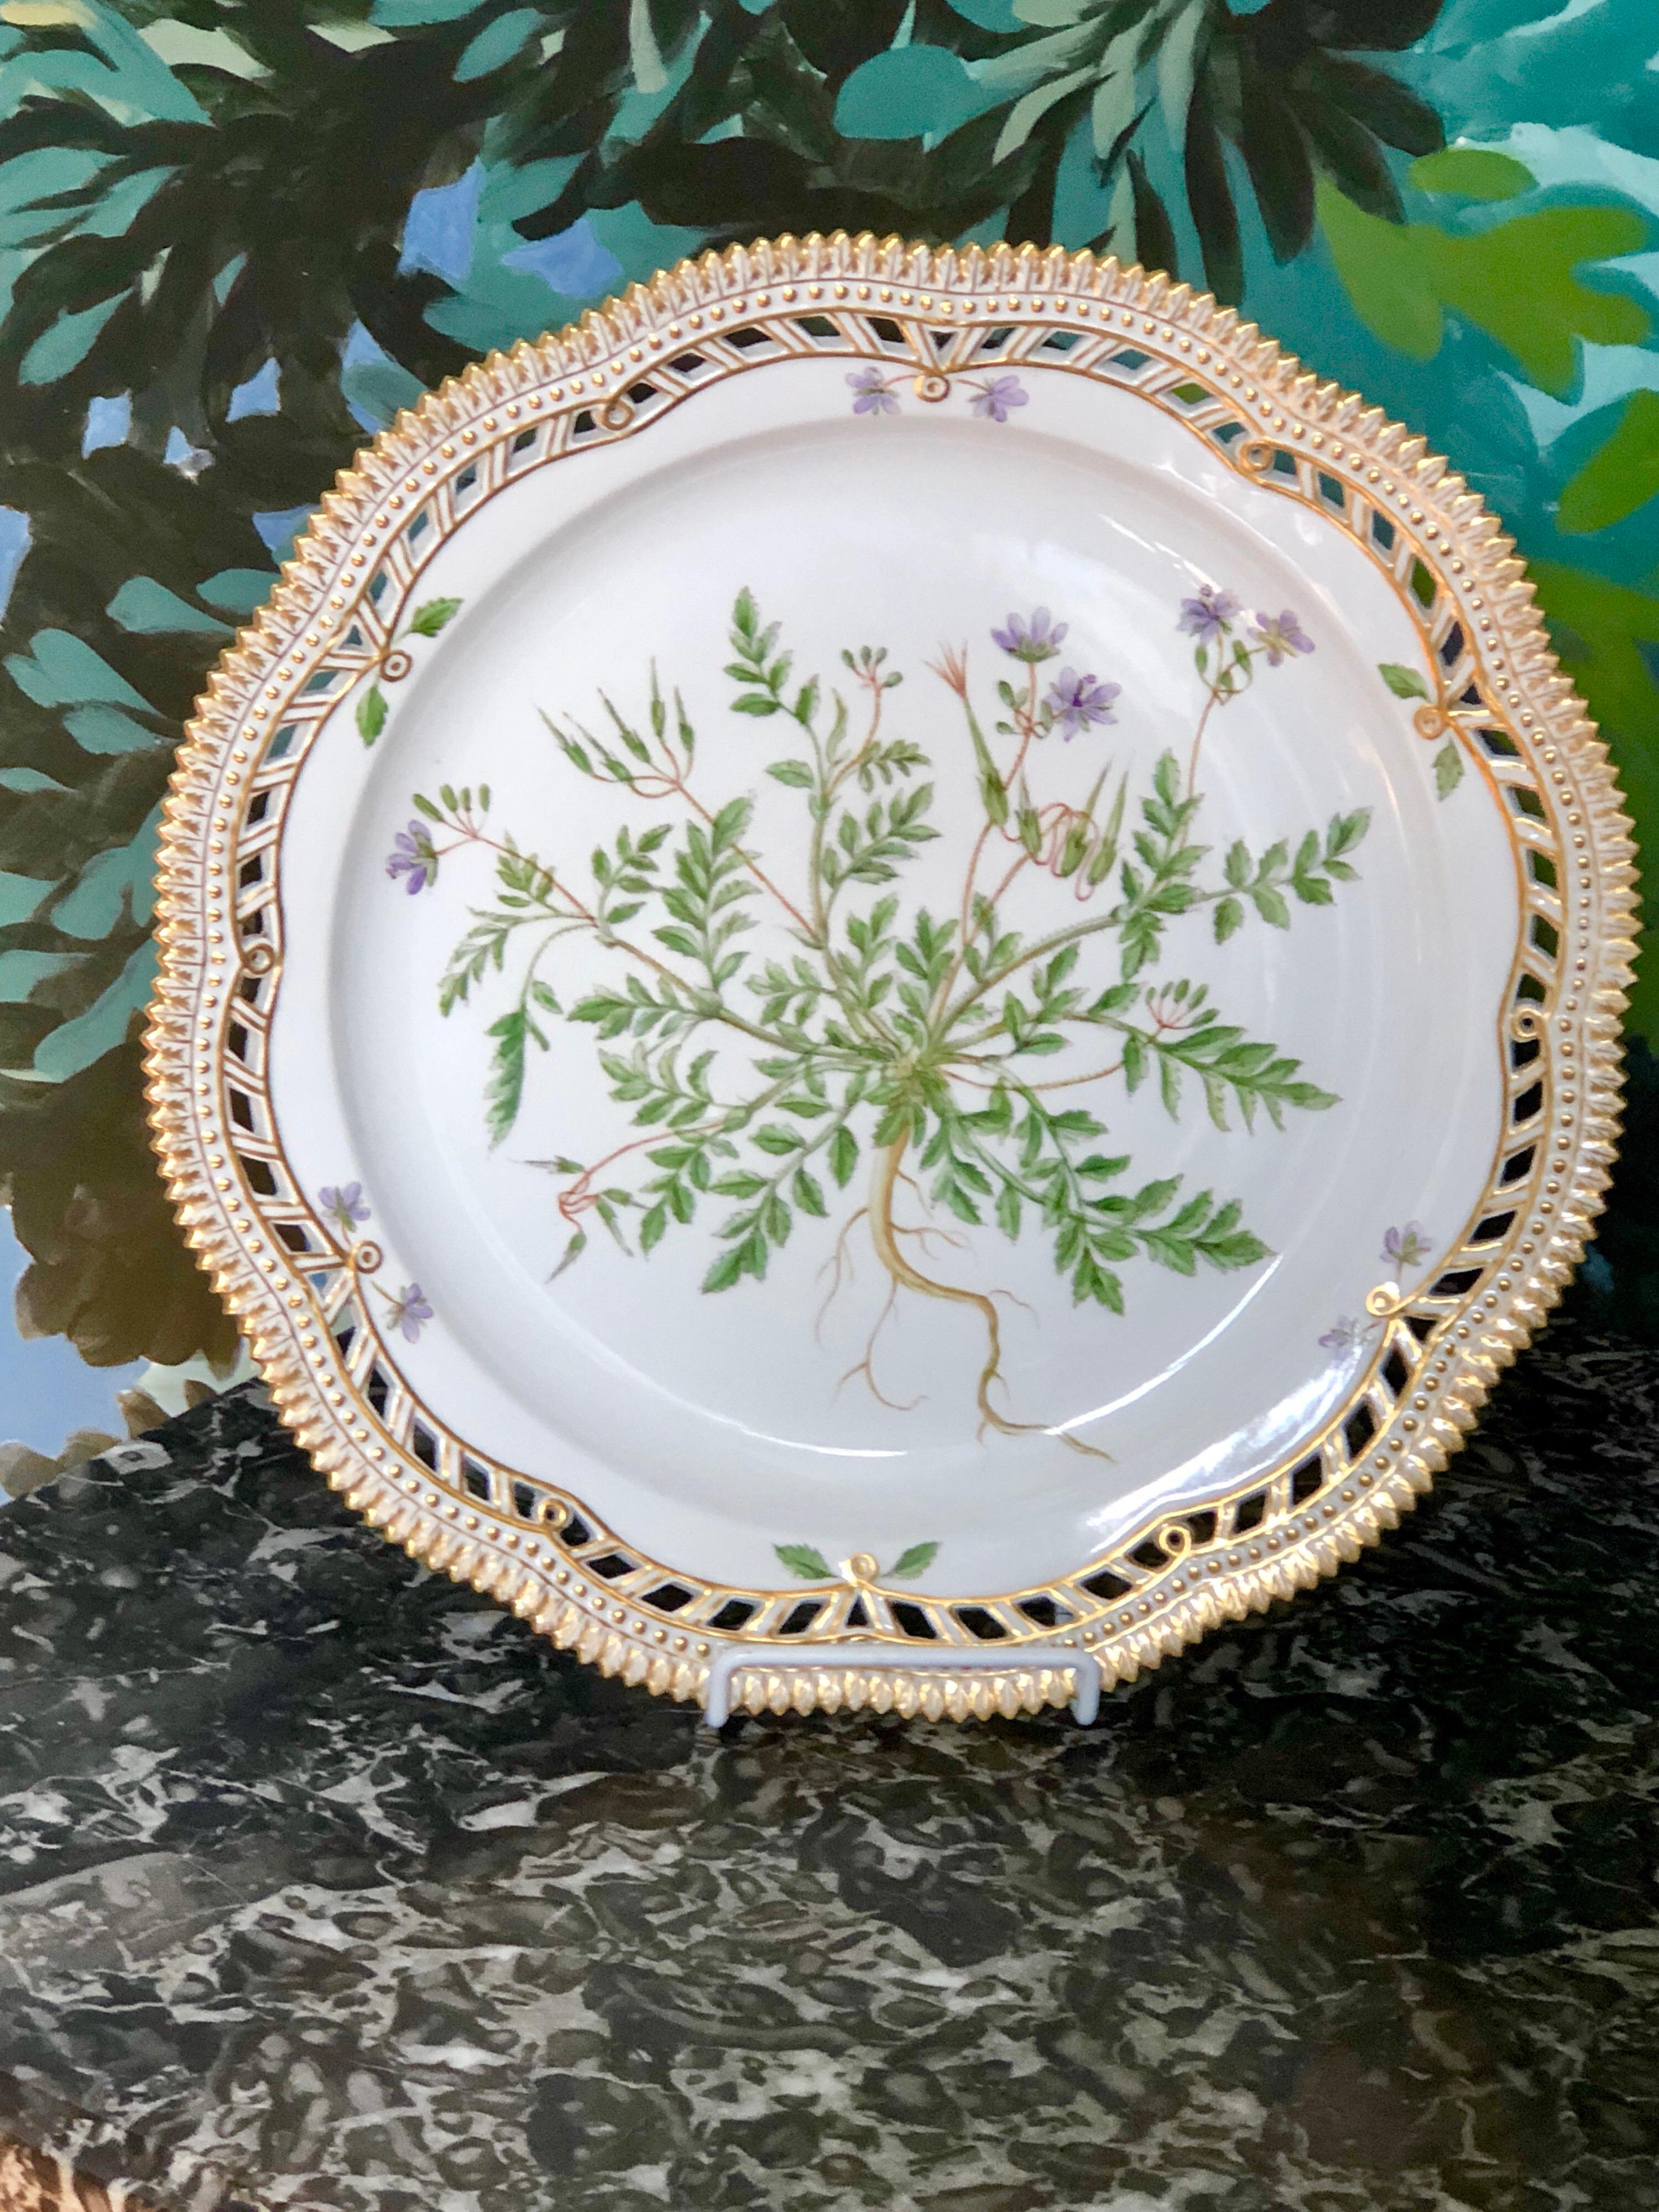 A beautiful 13” diameter Flora Danica platter with reticulated border and jagged edge. The underside displays the Latin name of the flower:”Erodium Cicutarium”.
Also the maker’s mark in green Royal Copenhagen Denmark and the hand-painted underglaze